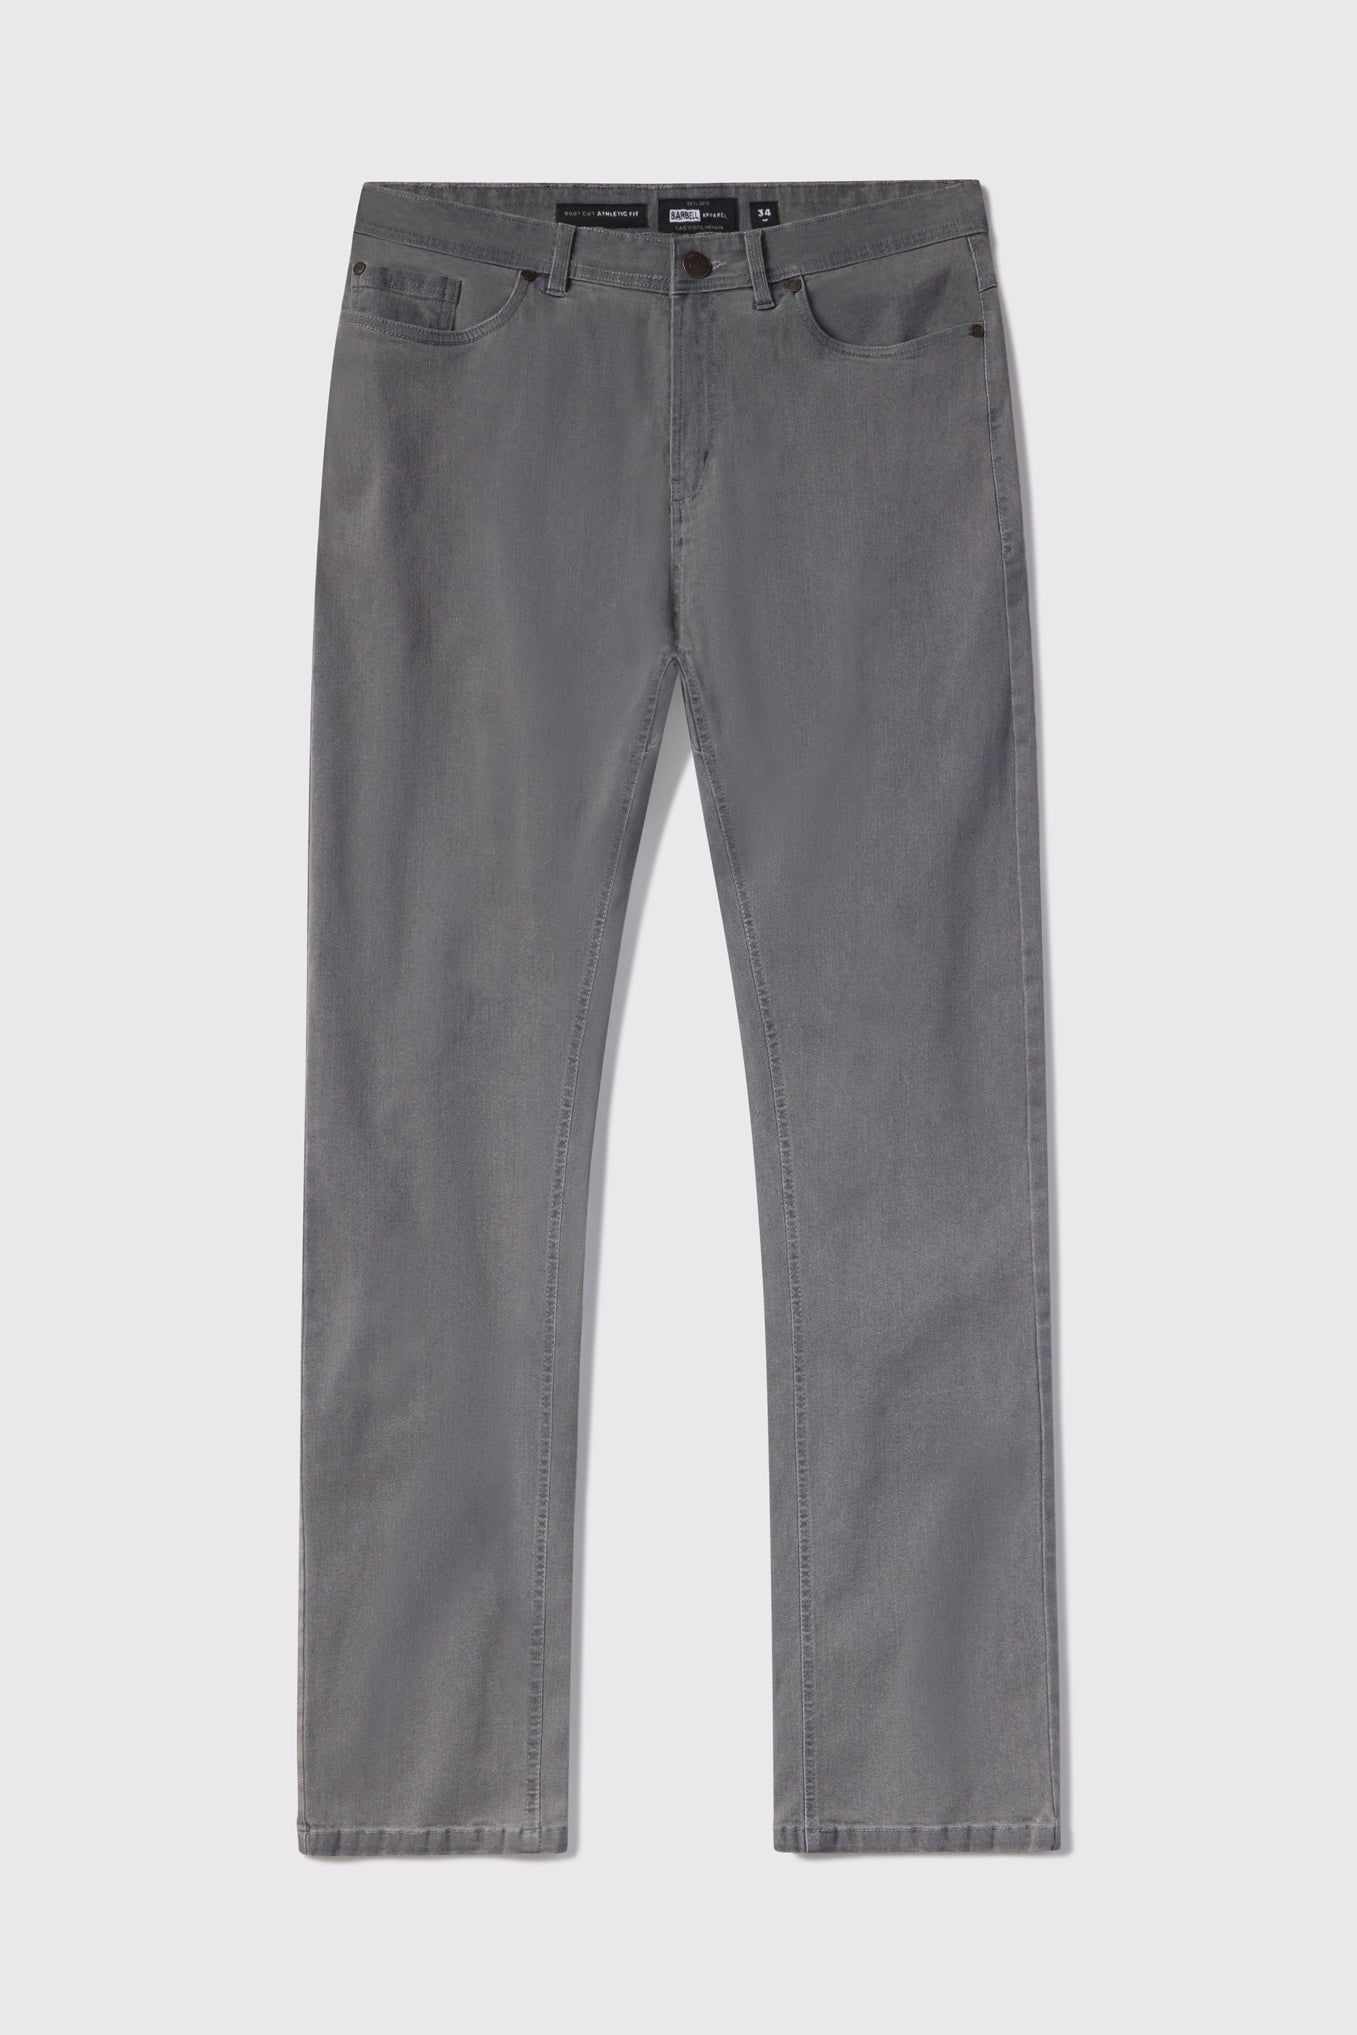 Mens Boot Cut Athletic Fit Jeans 2.0 -Cement - photo from front flat lay #color_cement